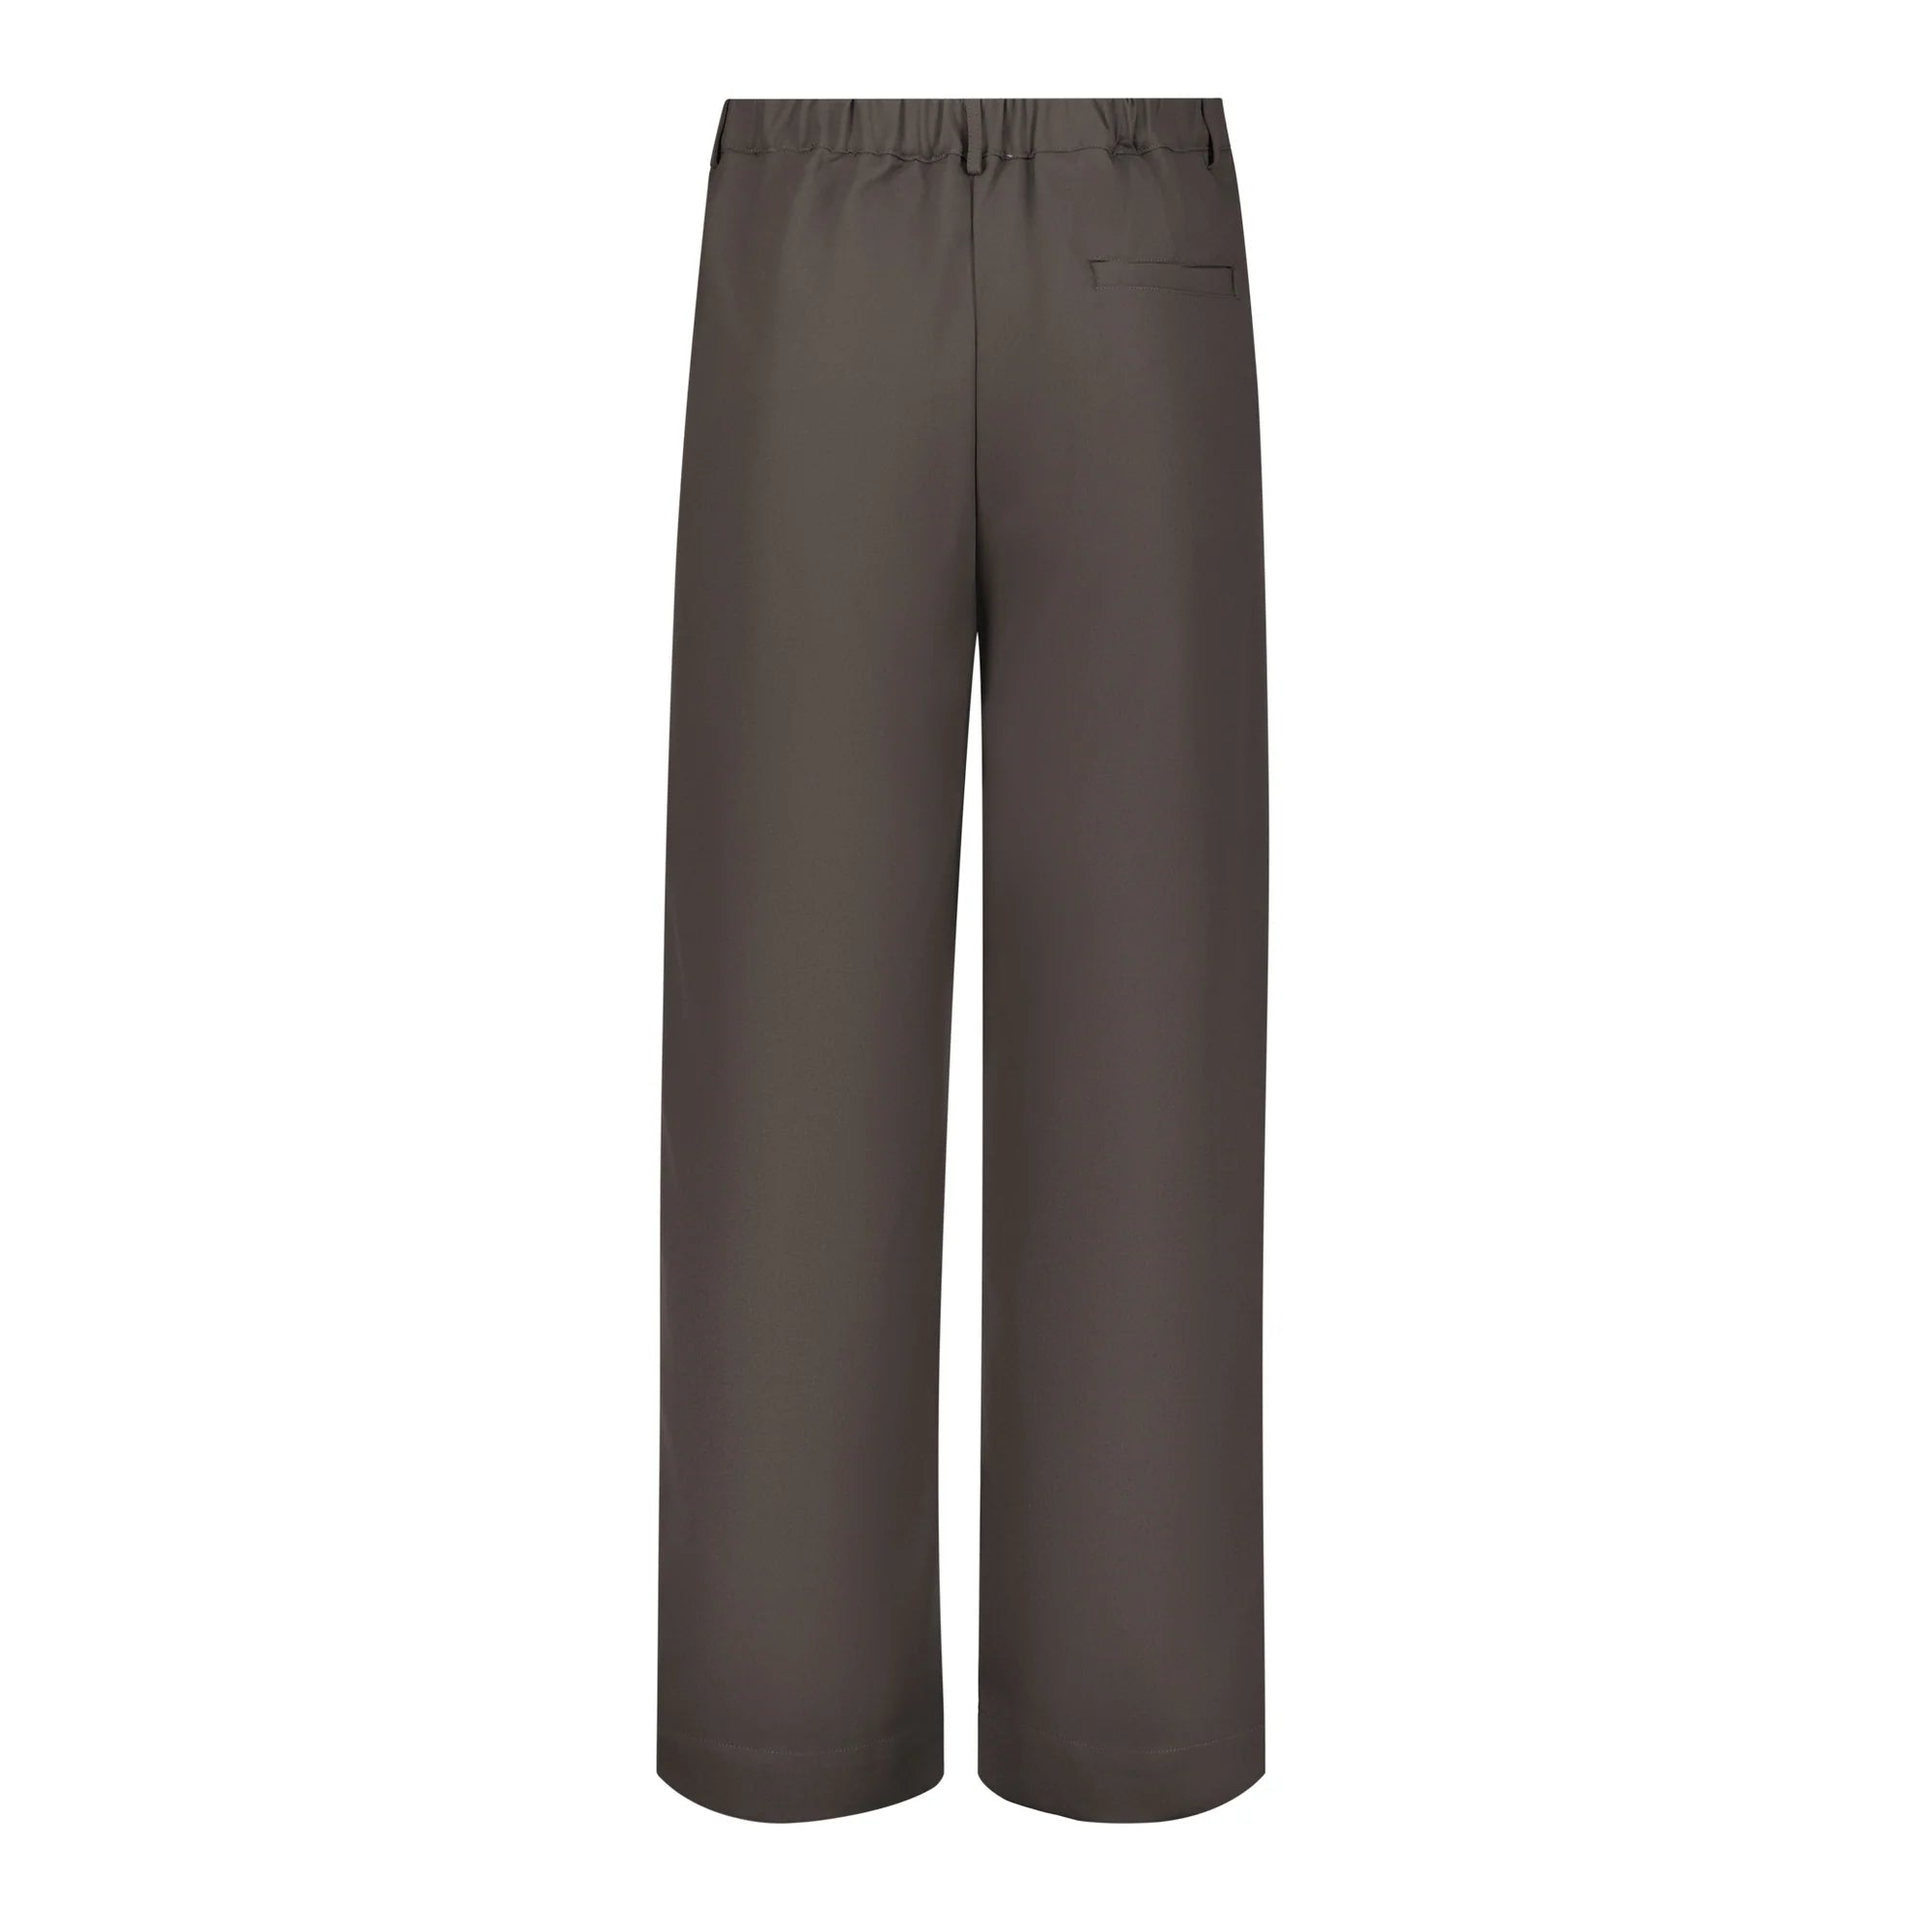 Personal Issues Wide Leg Trousers - Dark Brown